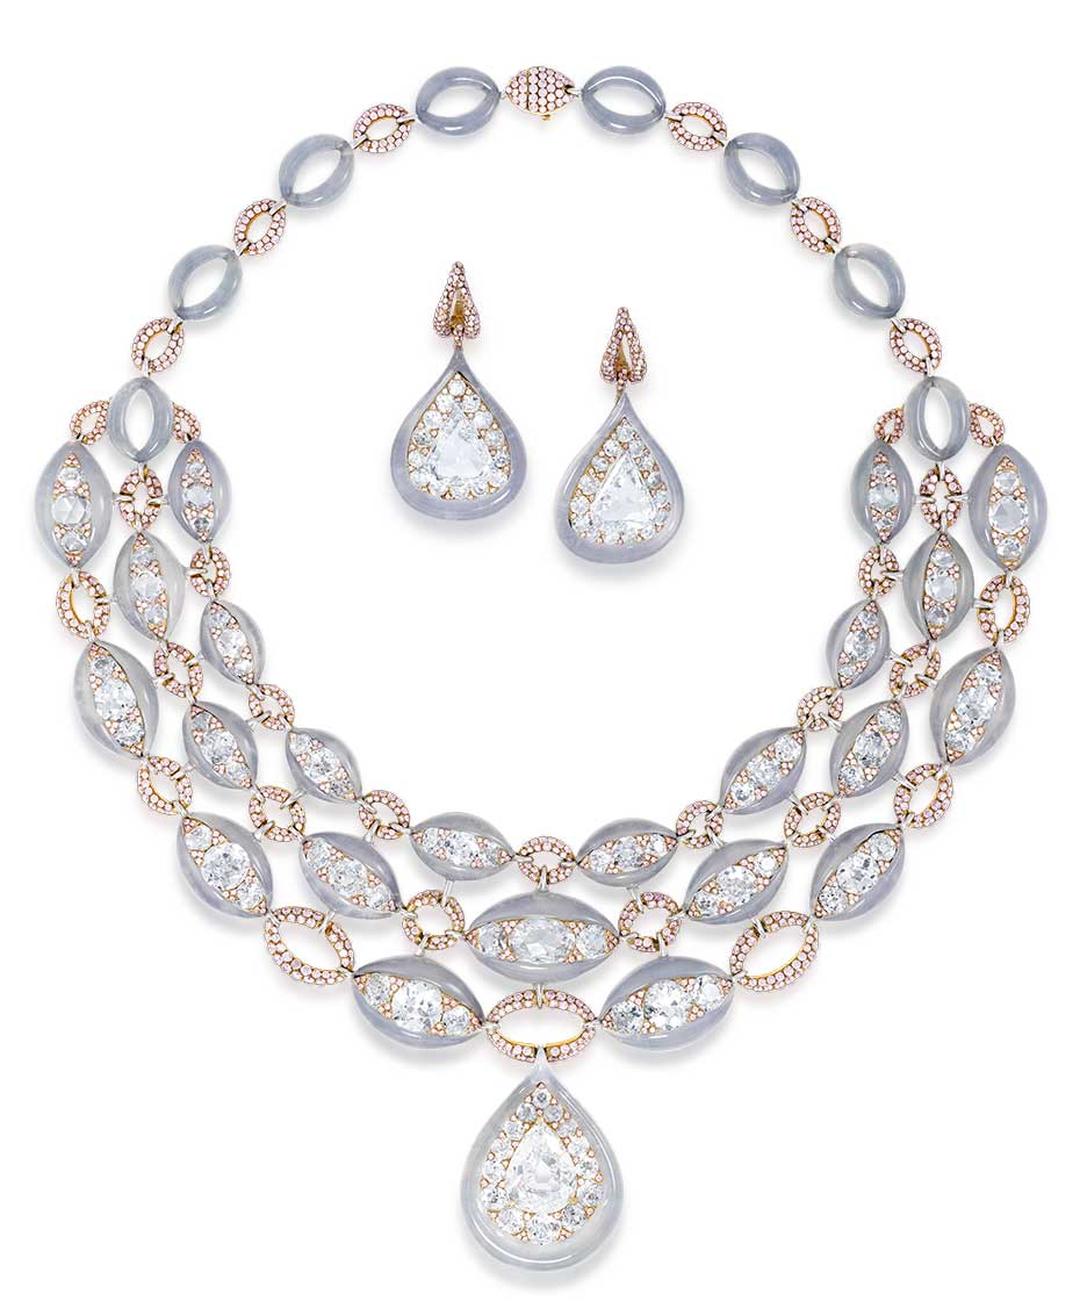 Glenn Spiro's jadeite suite includes a necklace set with a